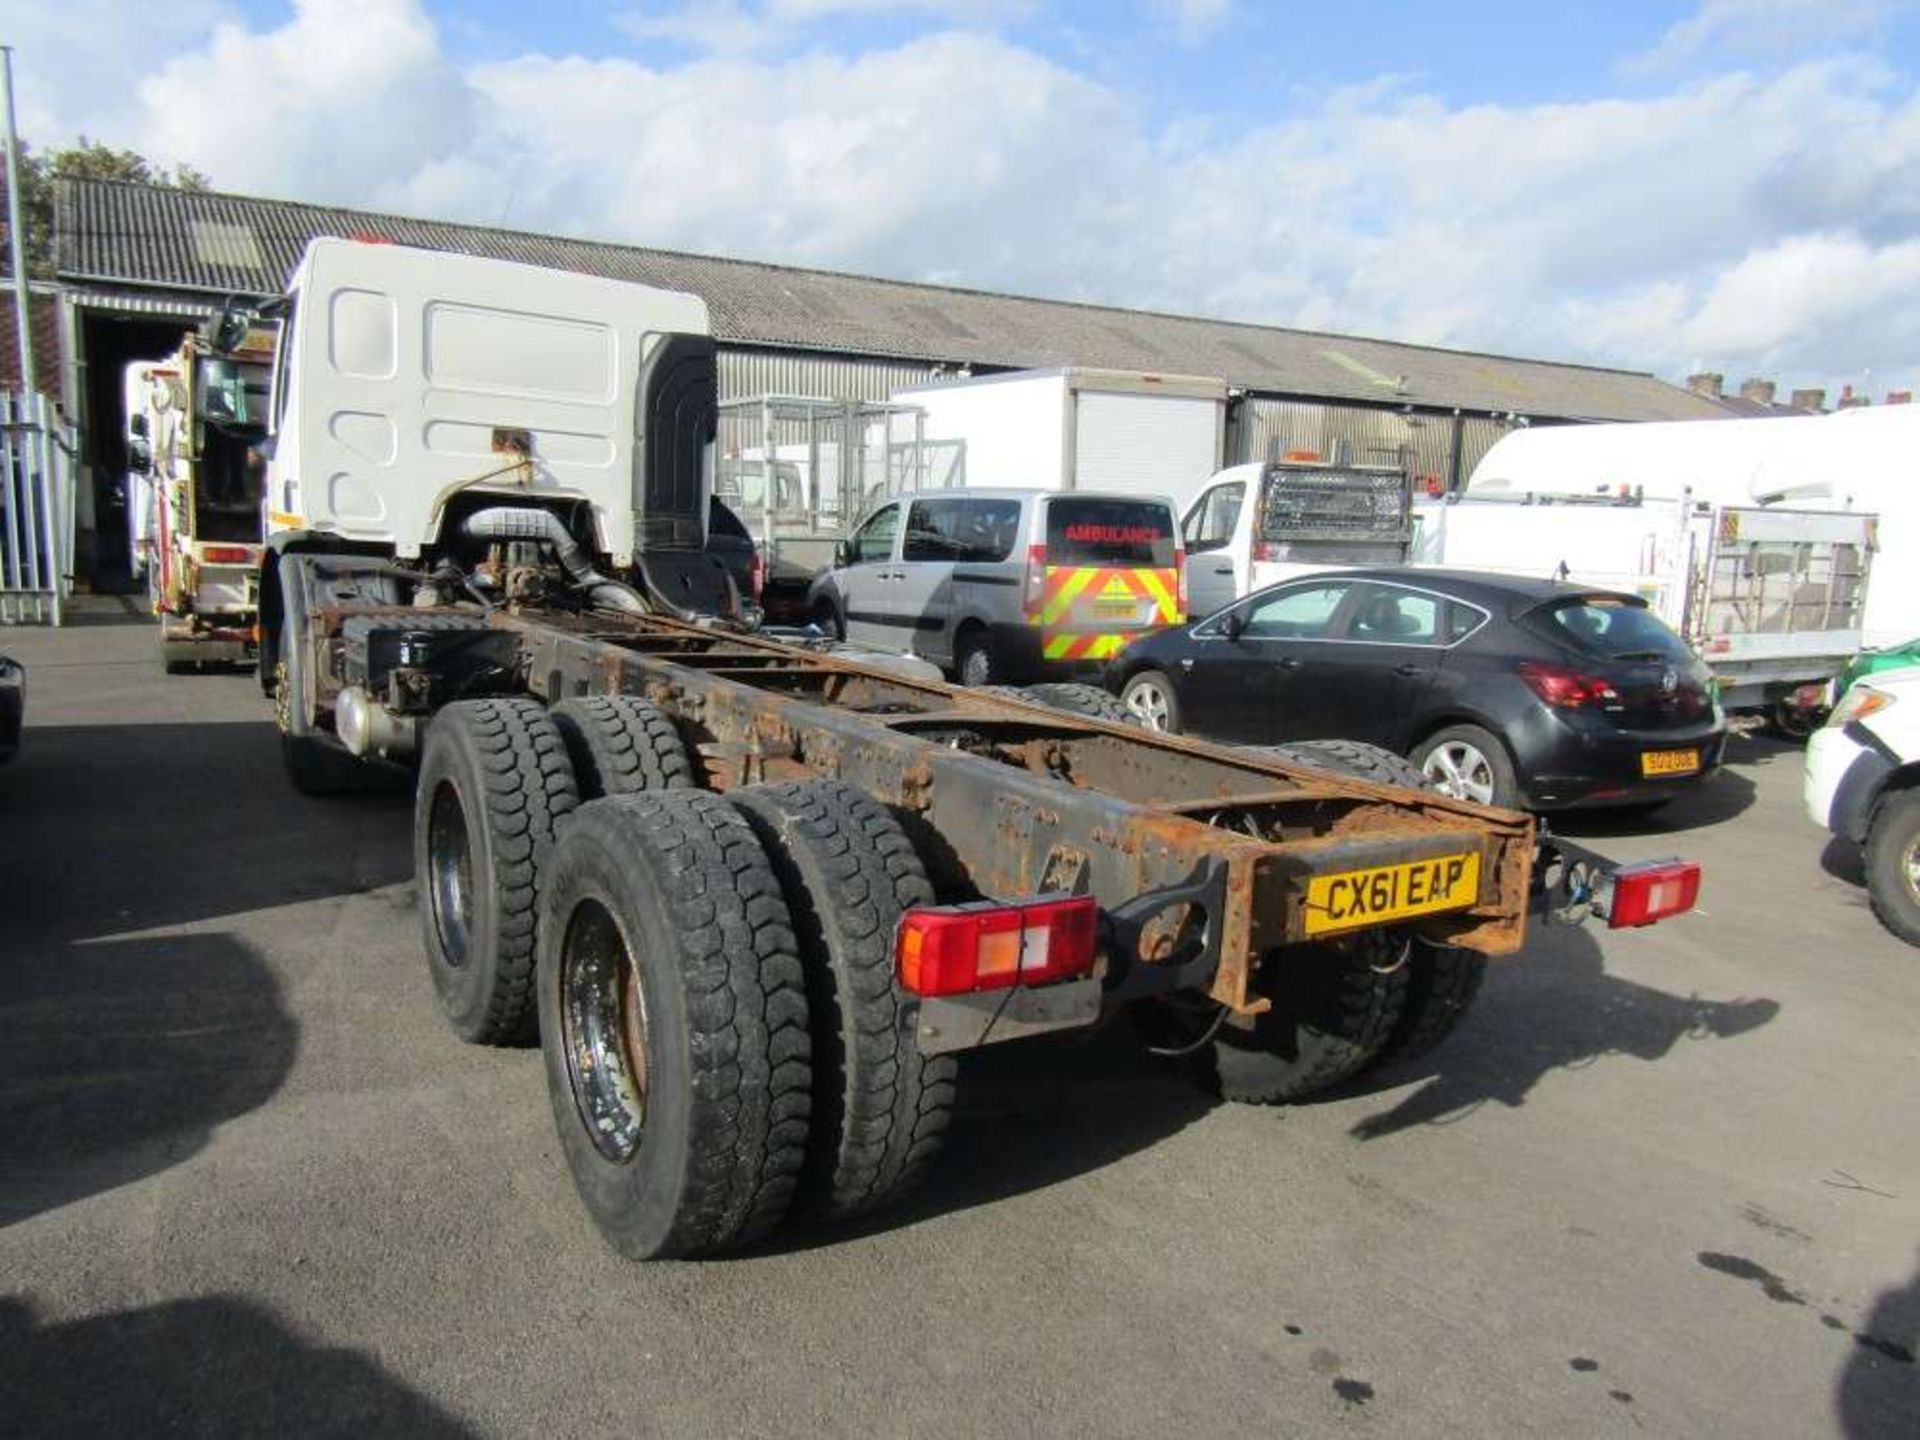 2011 61 reg Volvo 340 6 x 4 Chassis Cab - Image 3 of 7